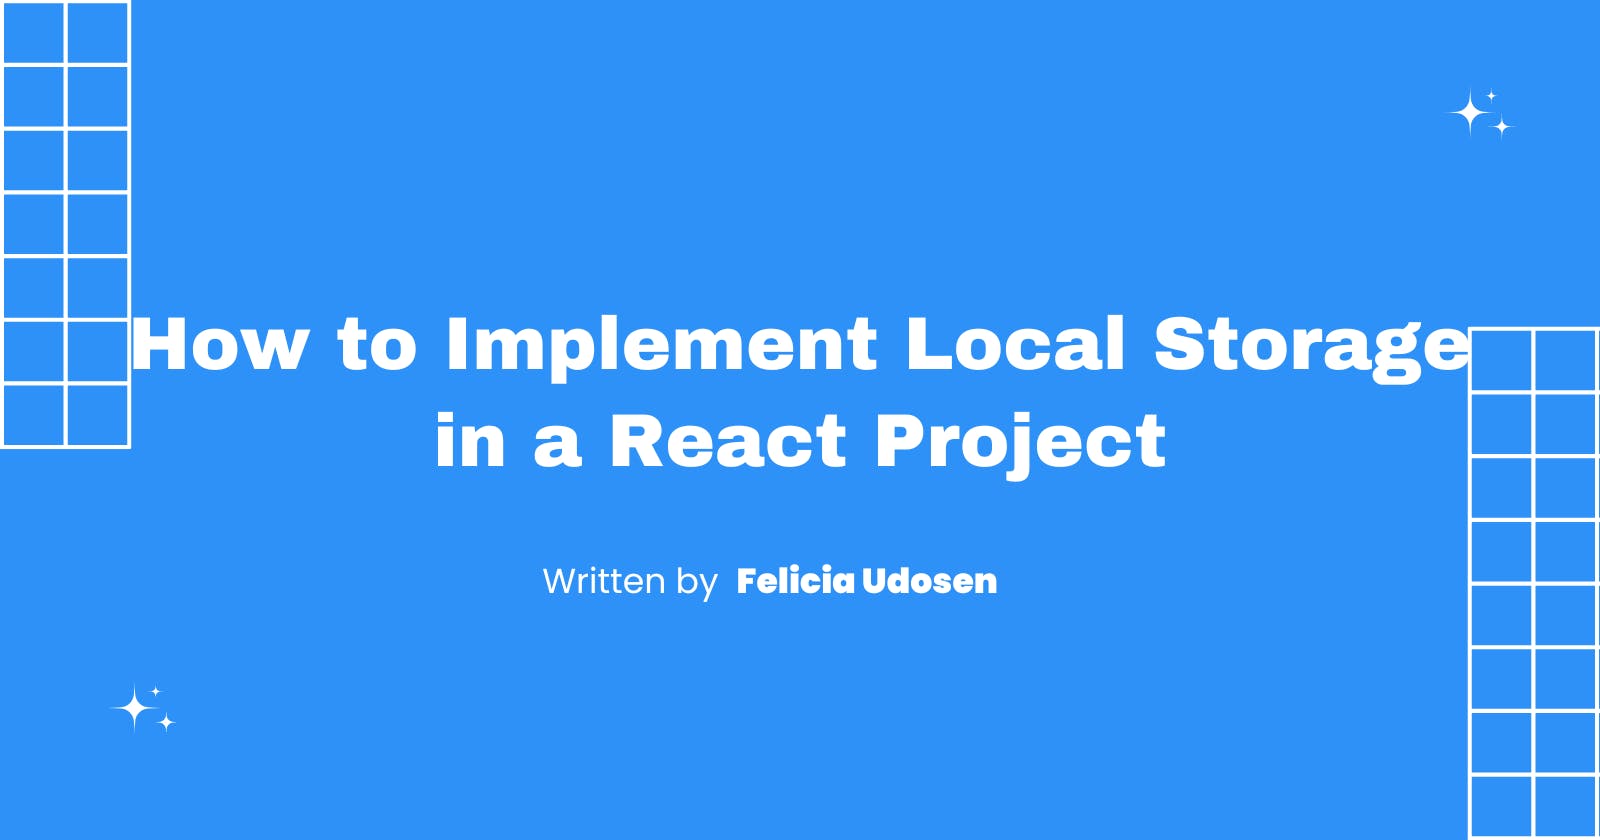 How to Implement Local Storage in a React Project